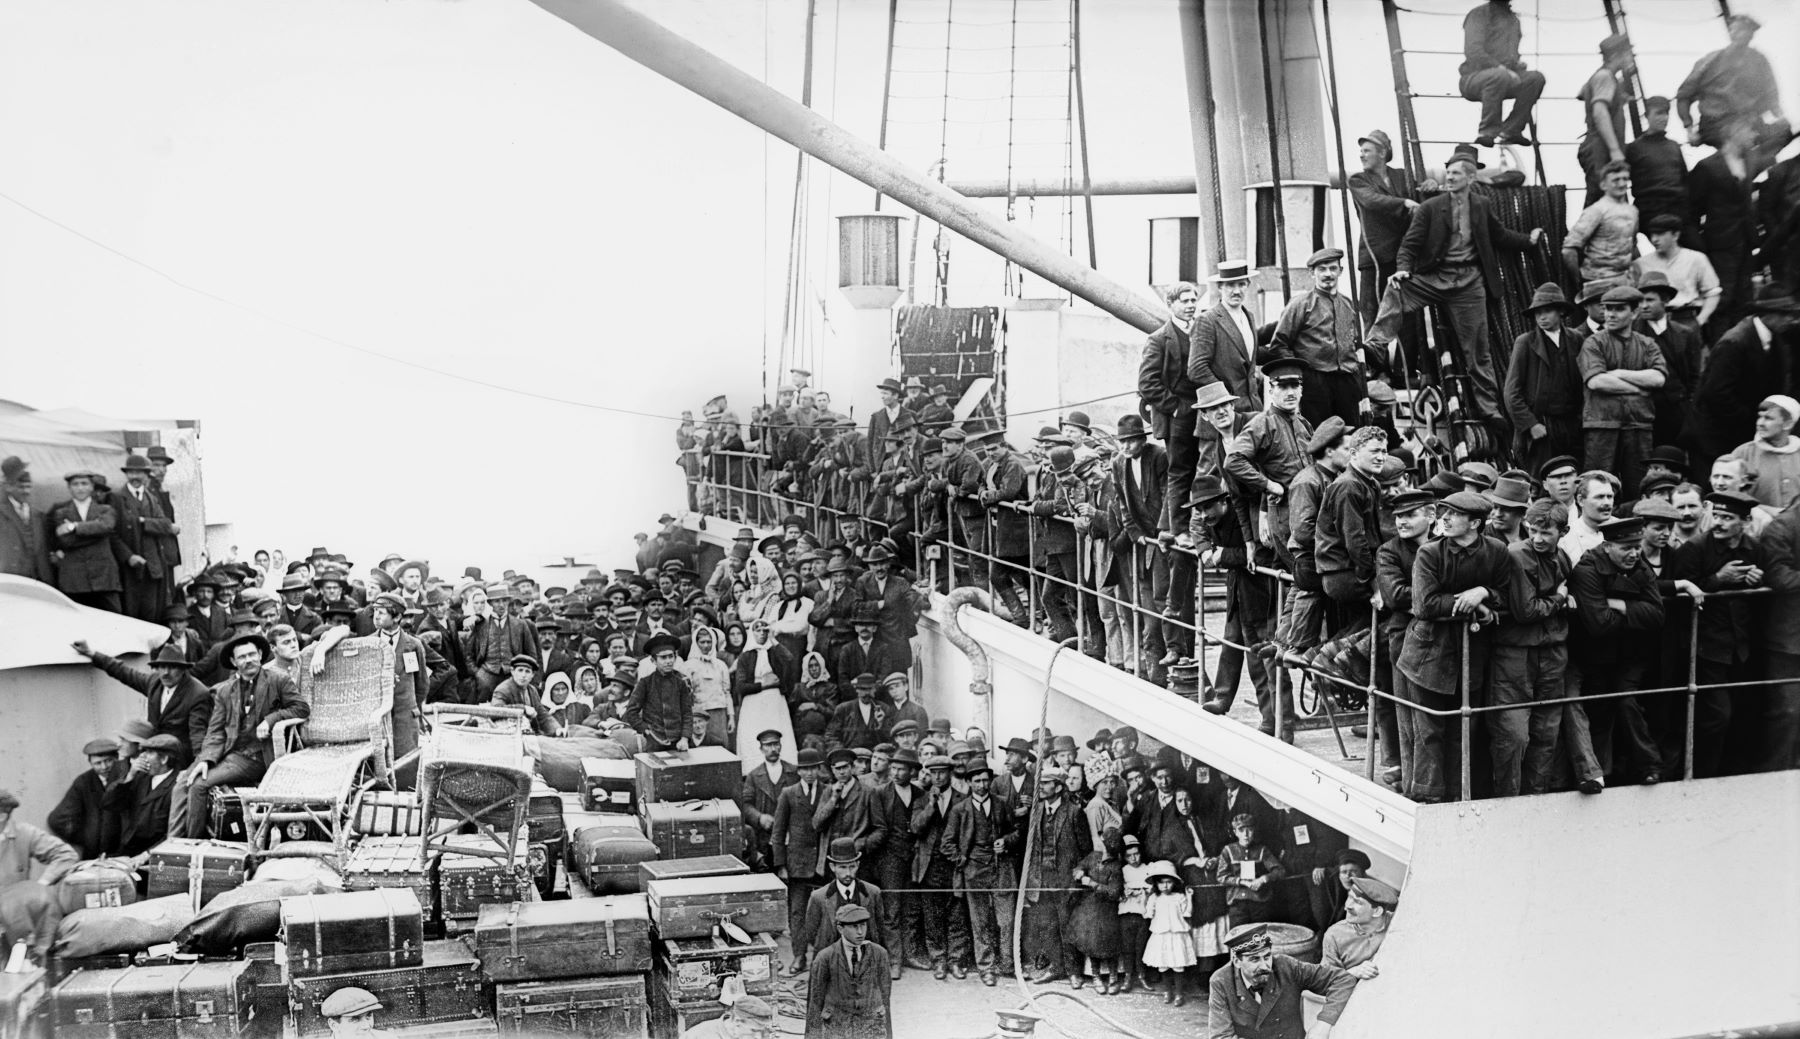 Black and white image of hundreds of immigrants packed onto deck of ship